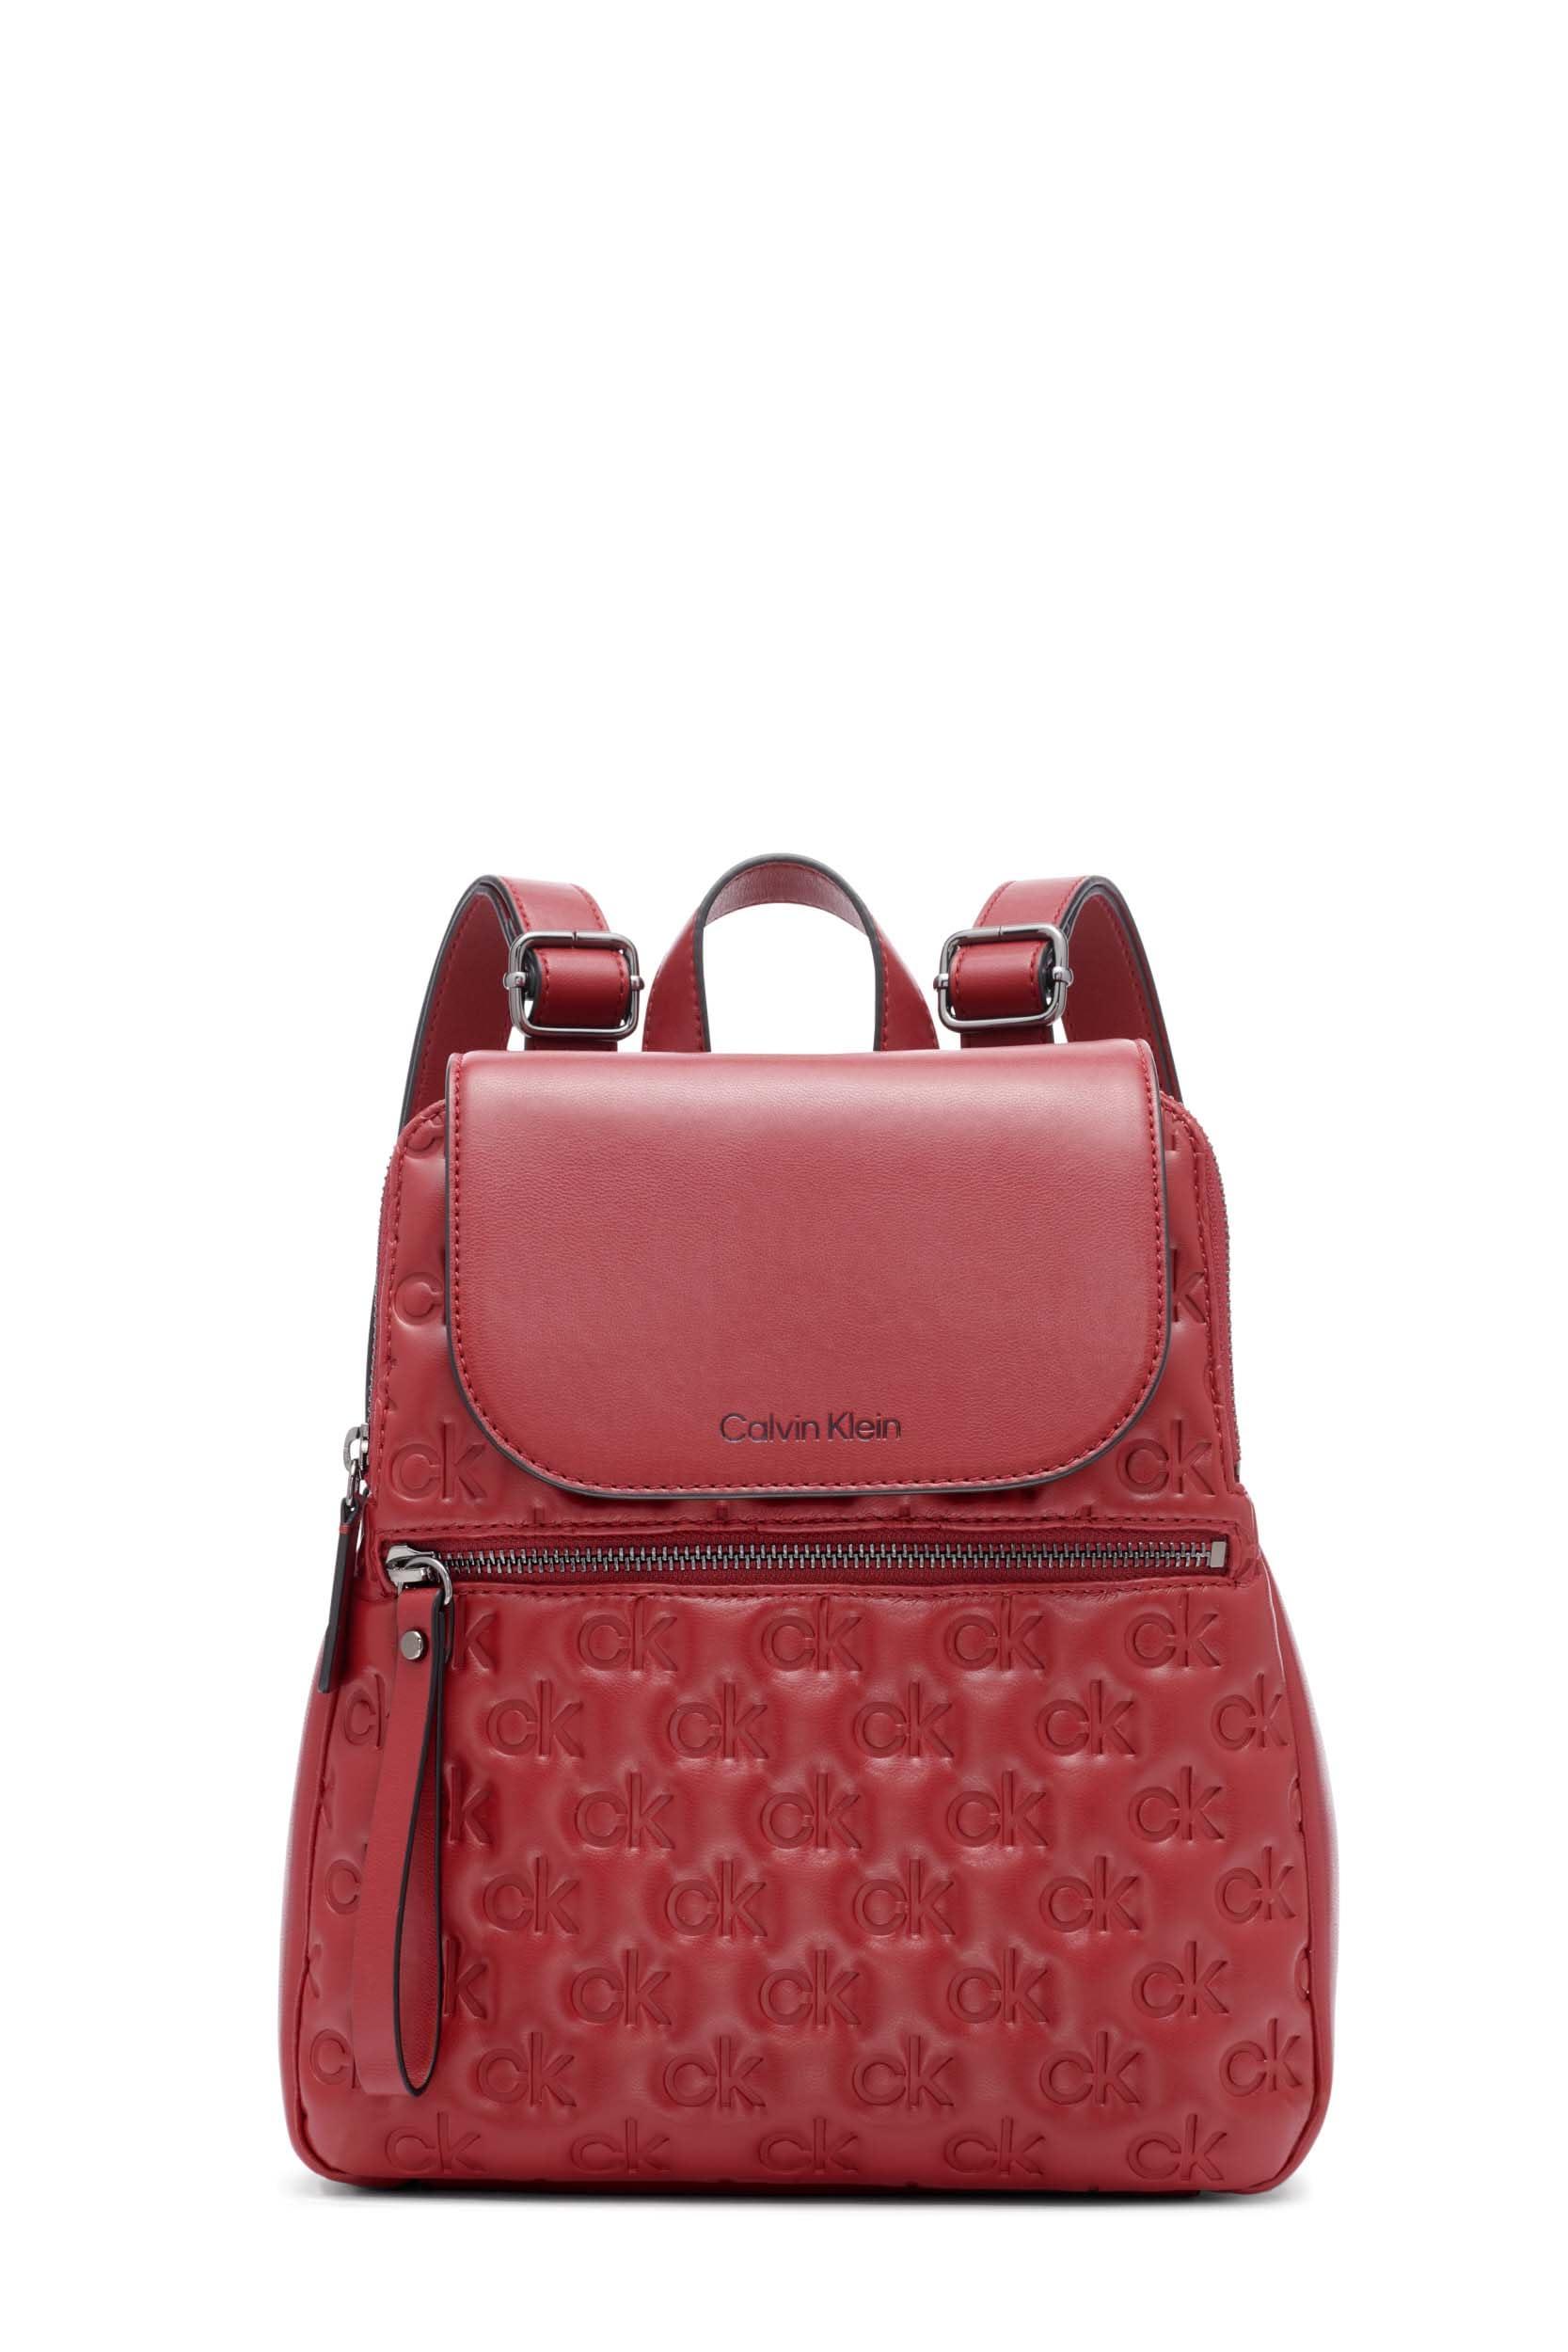 Calvin Klein Reyna Signature Key Item Flap Backpack in Red | Lyst